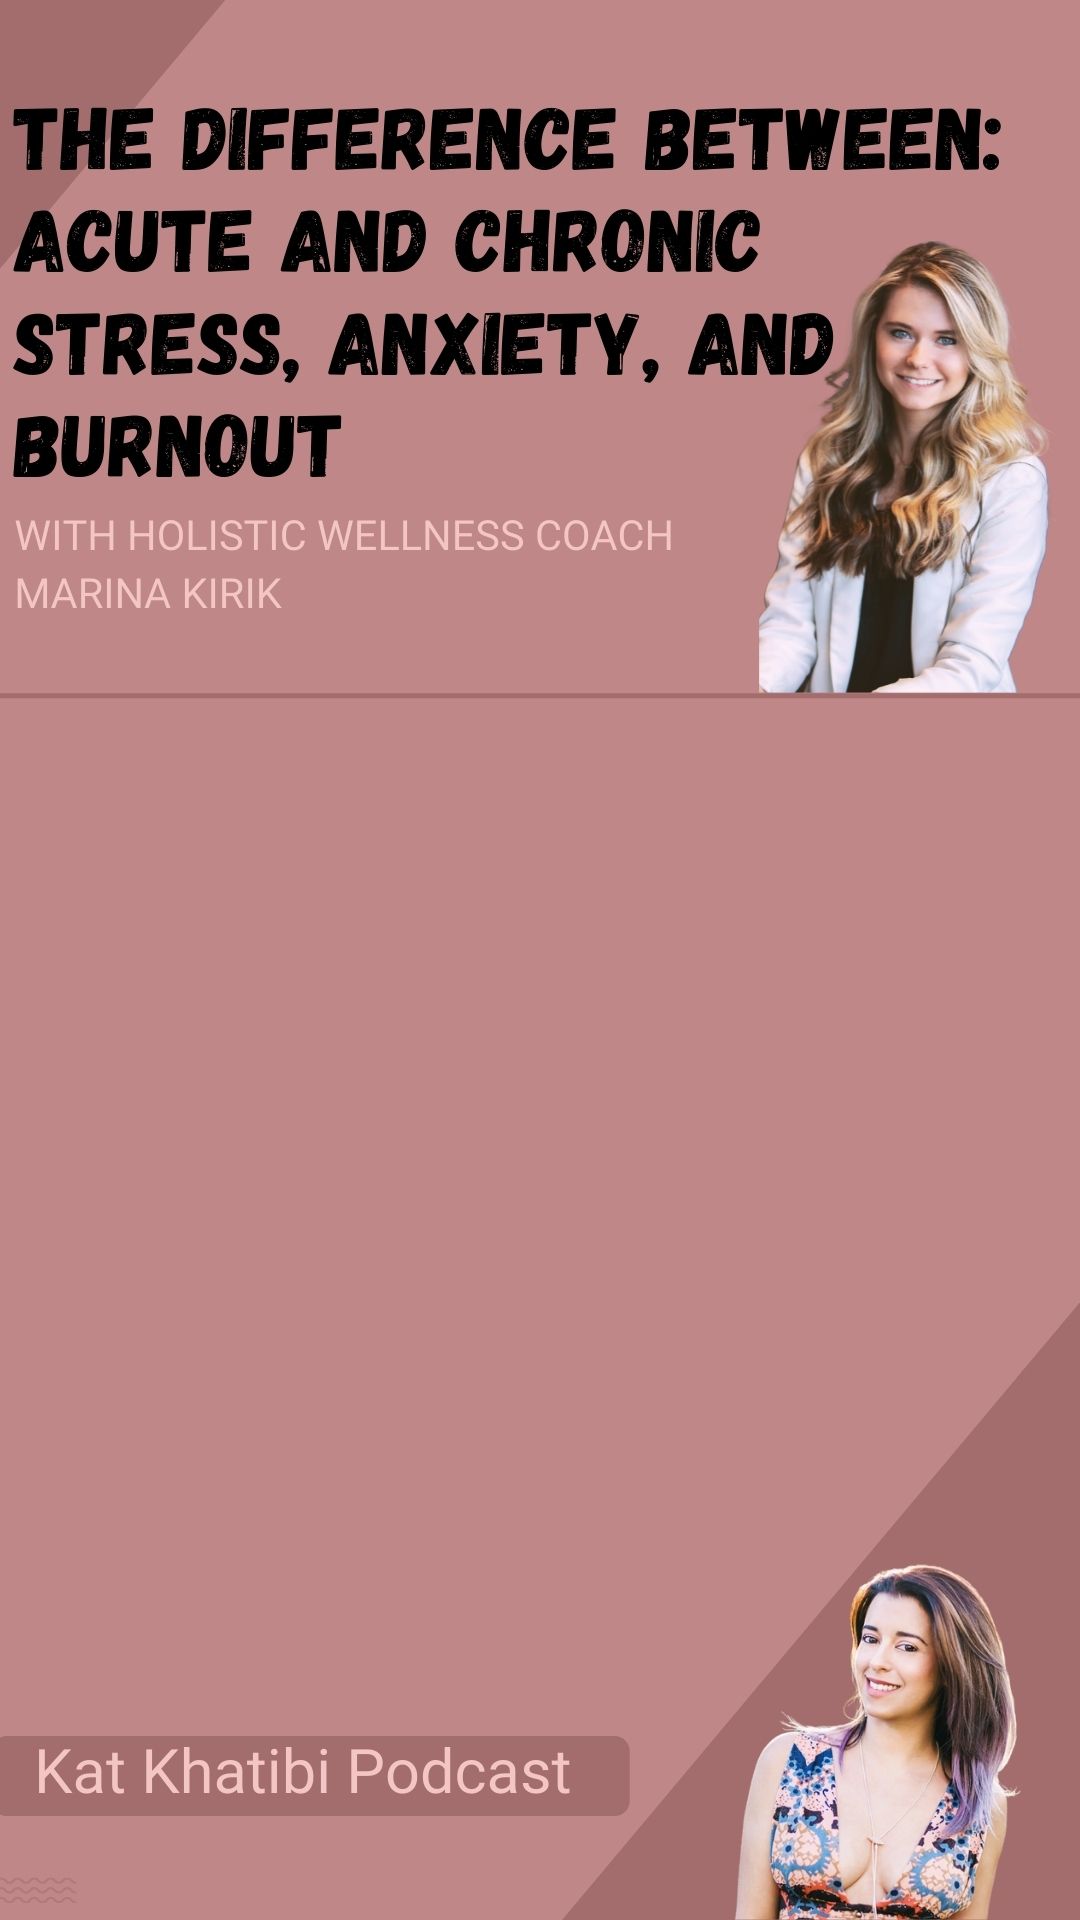 The Difference Between: Acute and Chronic Stress, Anxiety, and Burnout with Holistic Wellness Coach Marina Kirik